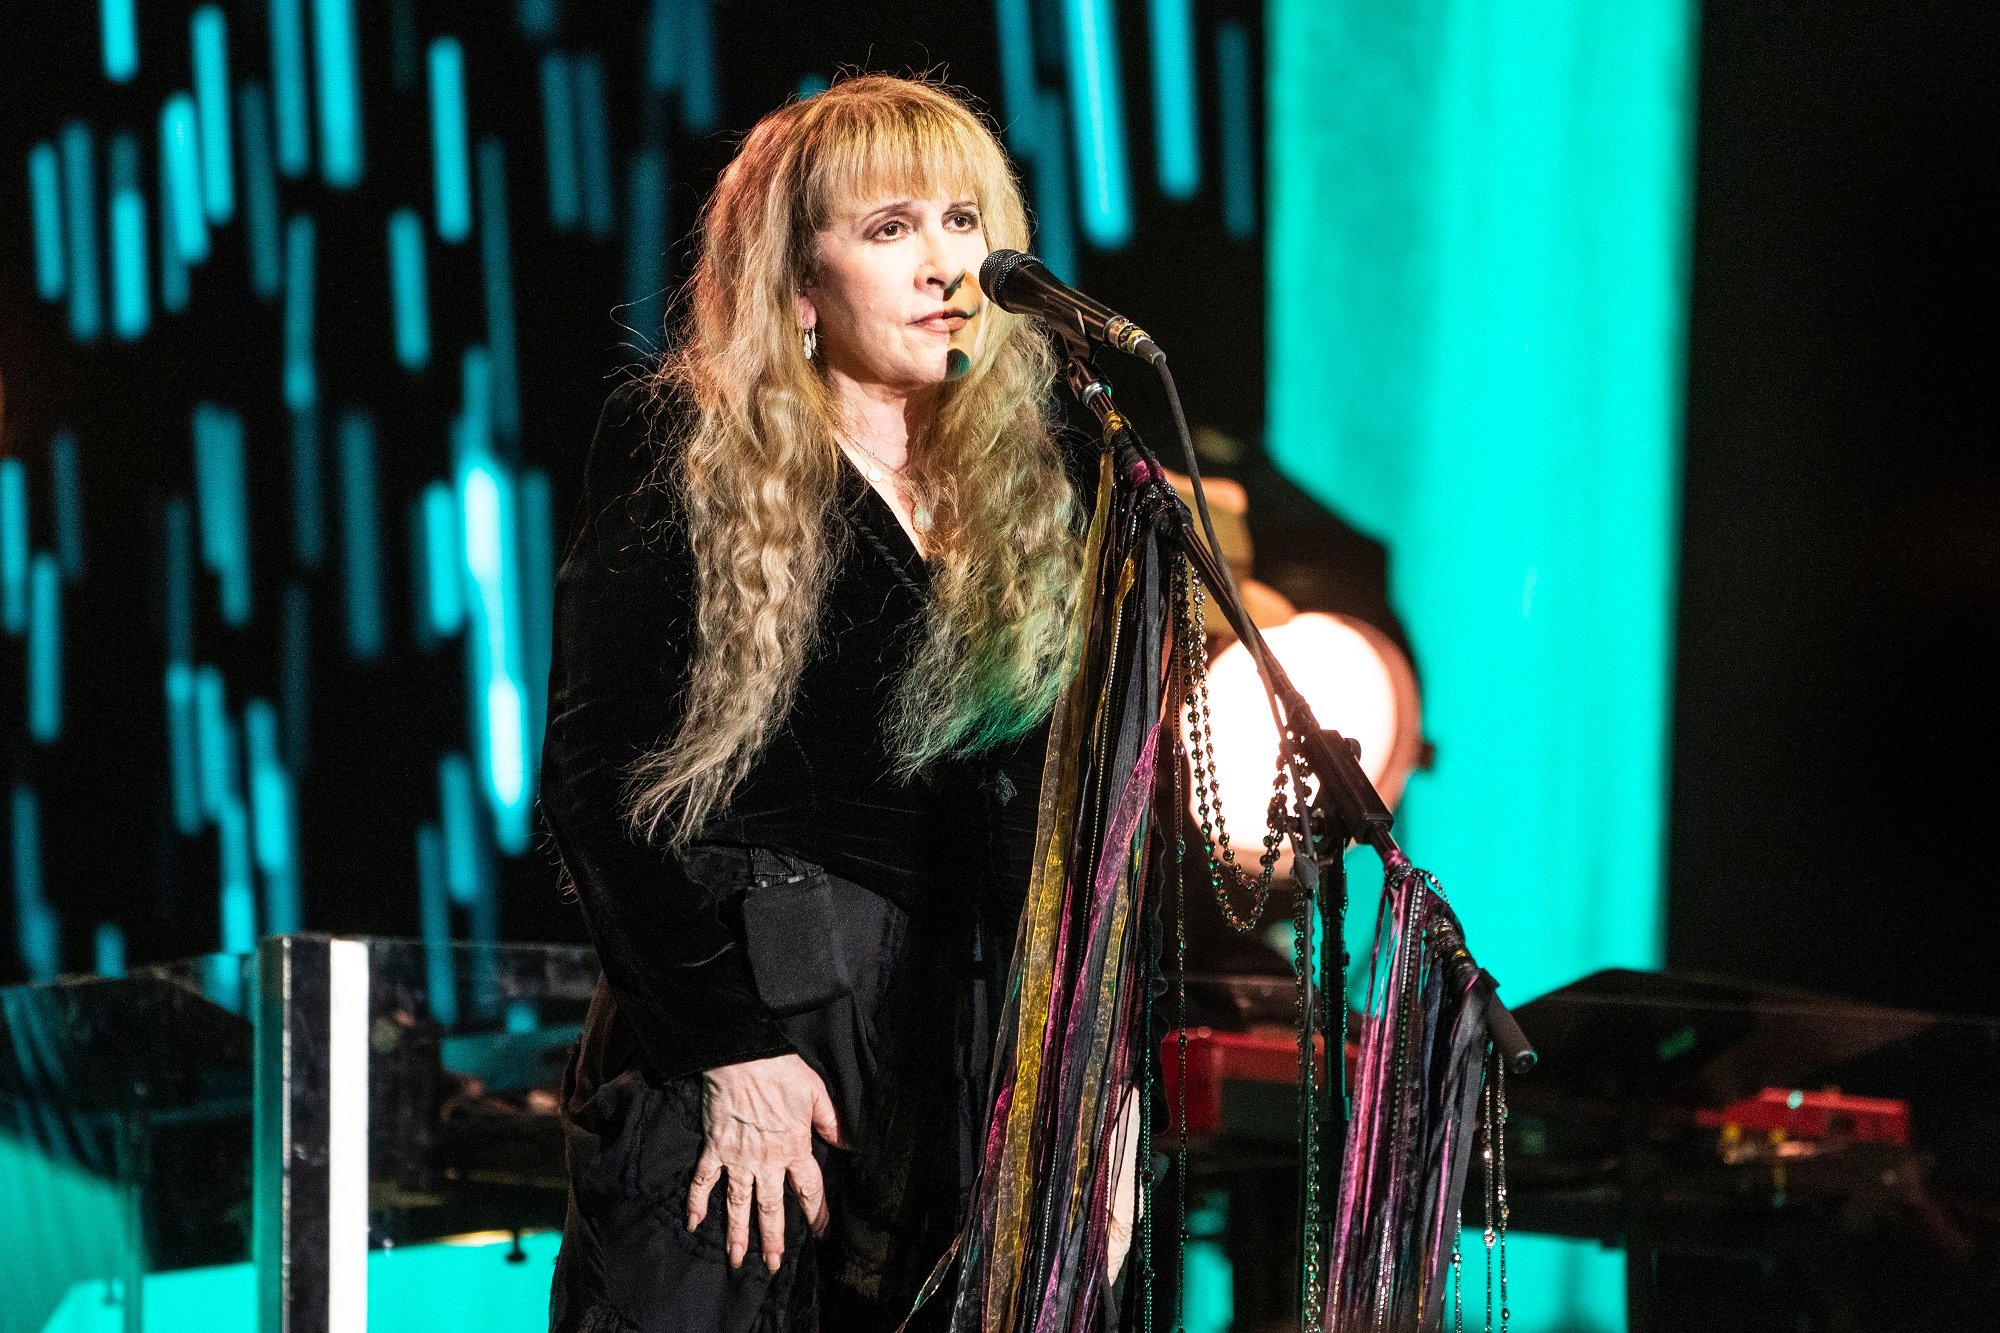 Stevie Nicks stands on stage in a black outfit